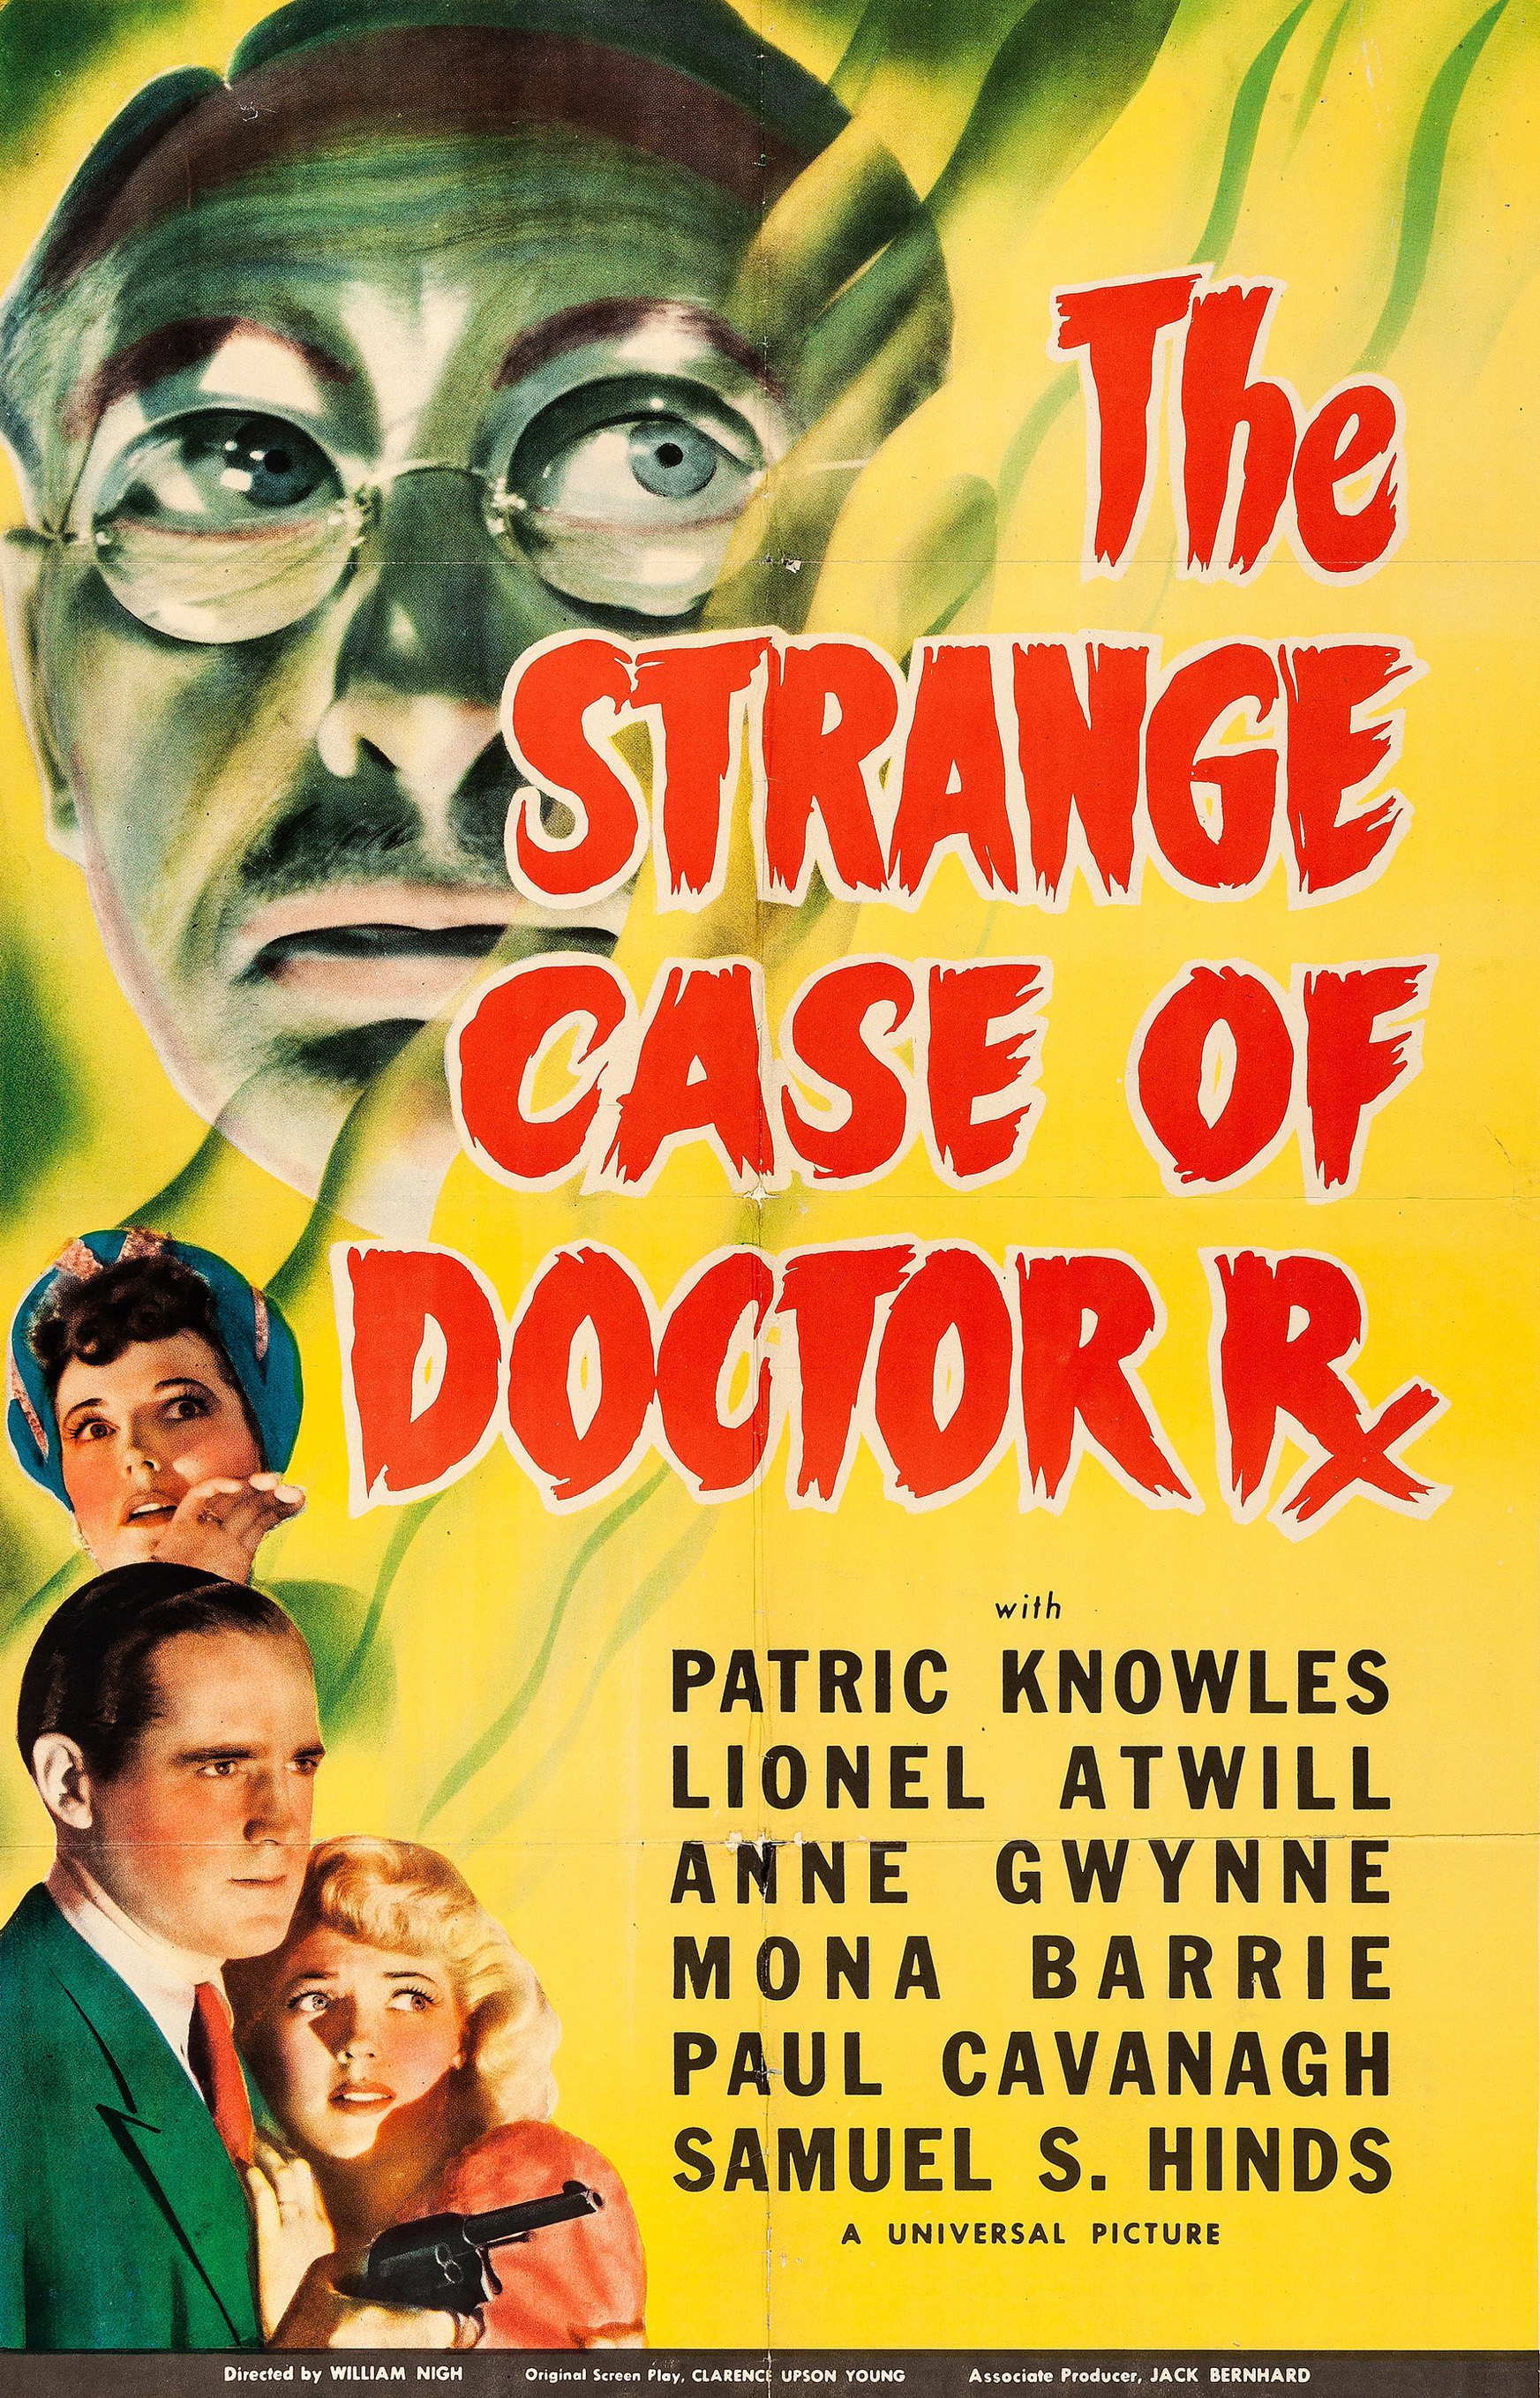 The Strange Case of Doctor Rx (1942) starring Patric Knowles on DVD on DVD